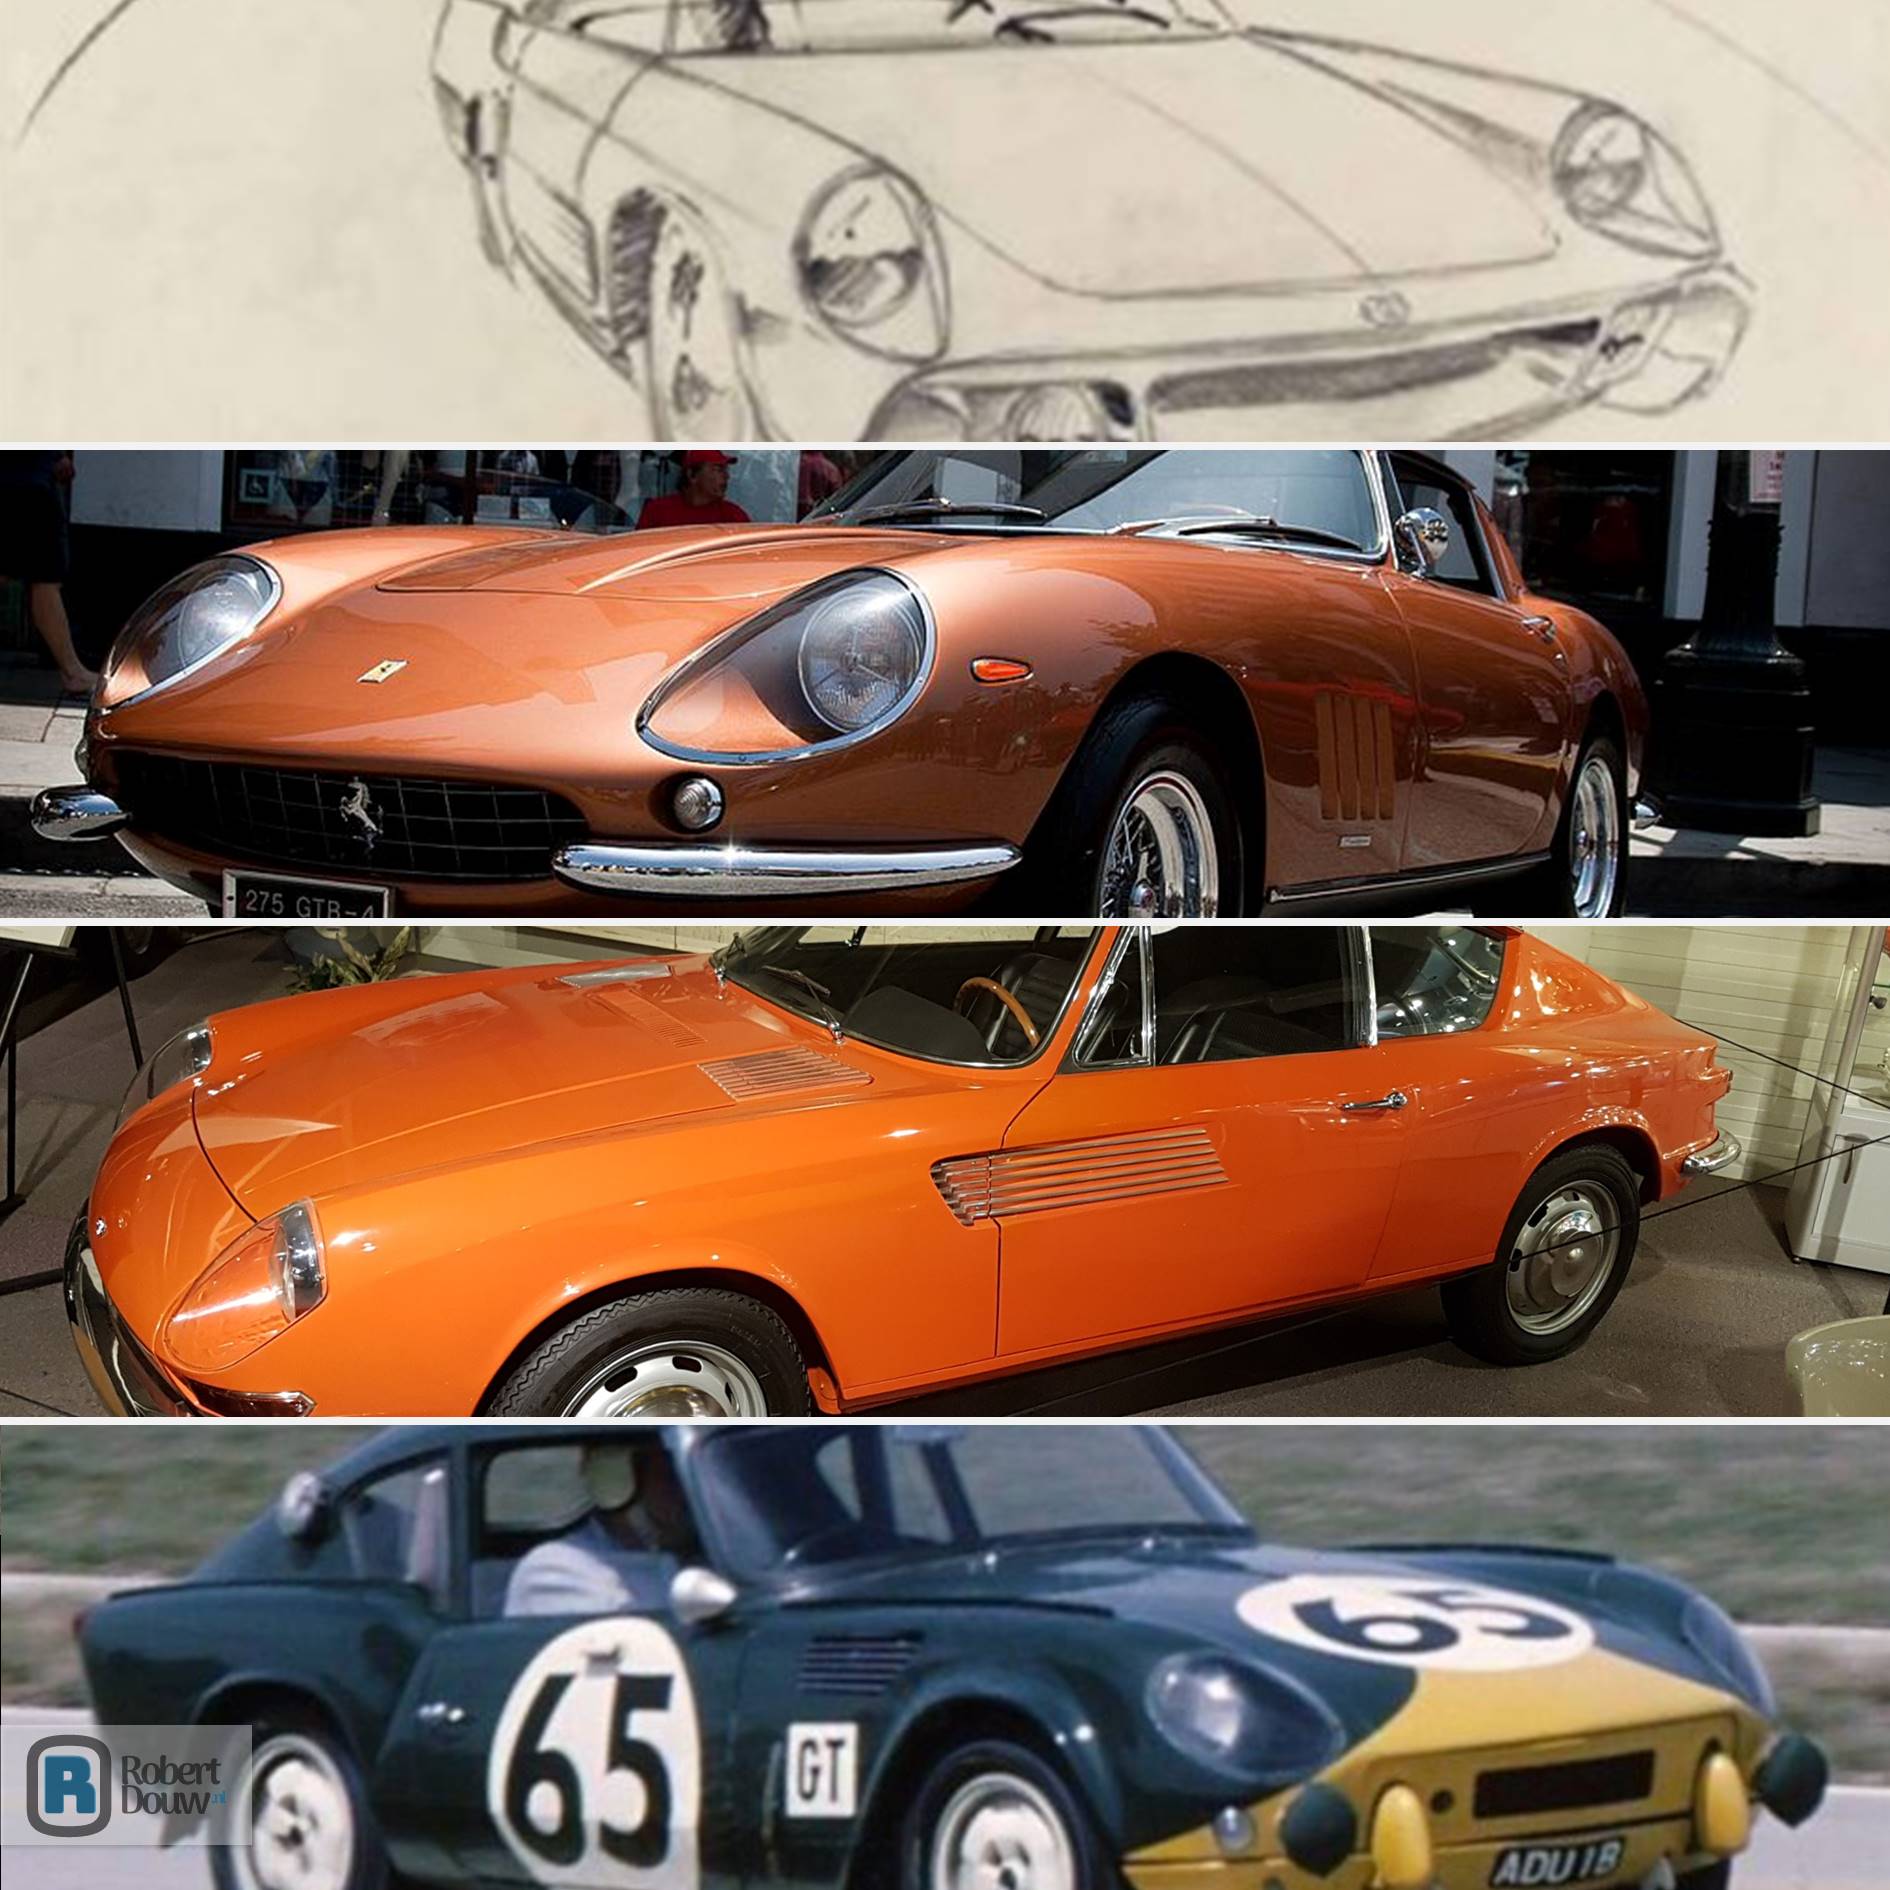 A sketch and three photos of cars with round headlights behind convex glass.